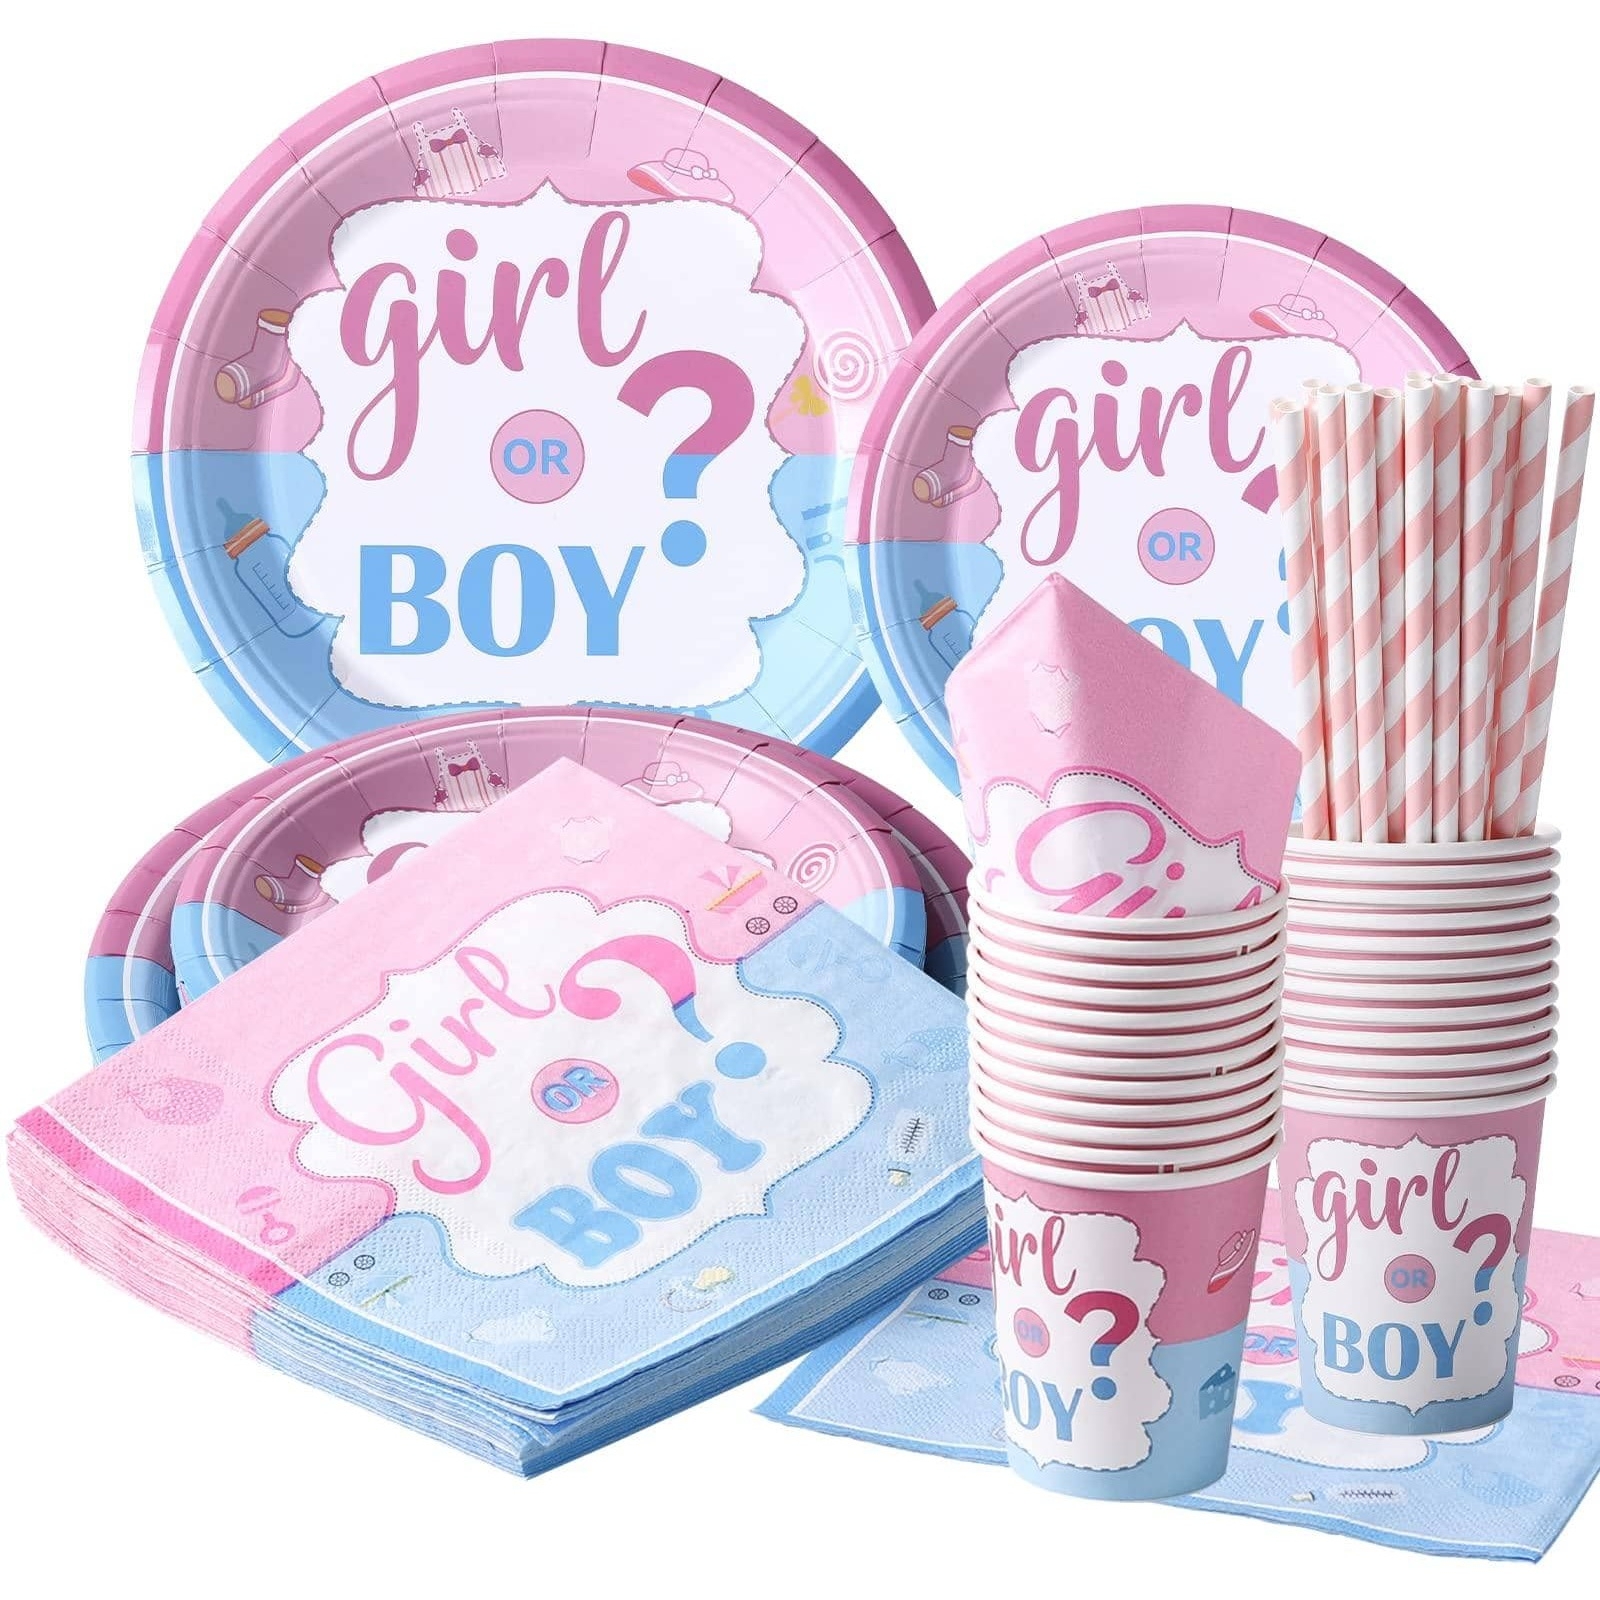 WSBArt 120PCS 24 Guests Gender Reveal Plates Tablewares Supplies, Includes Disposable Paper Plates, Cups, Napkins and Straws, Boy or Girl for Party Dinnwares Decorations - image 1 of 6